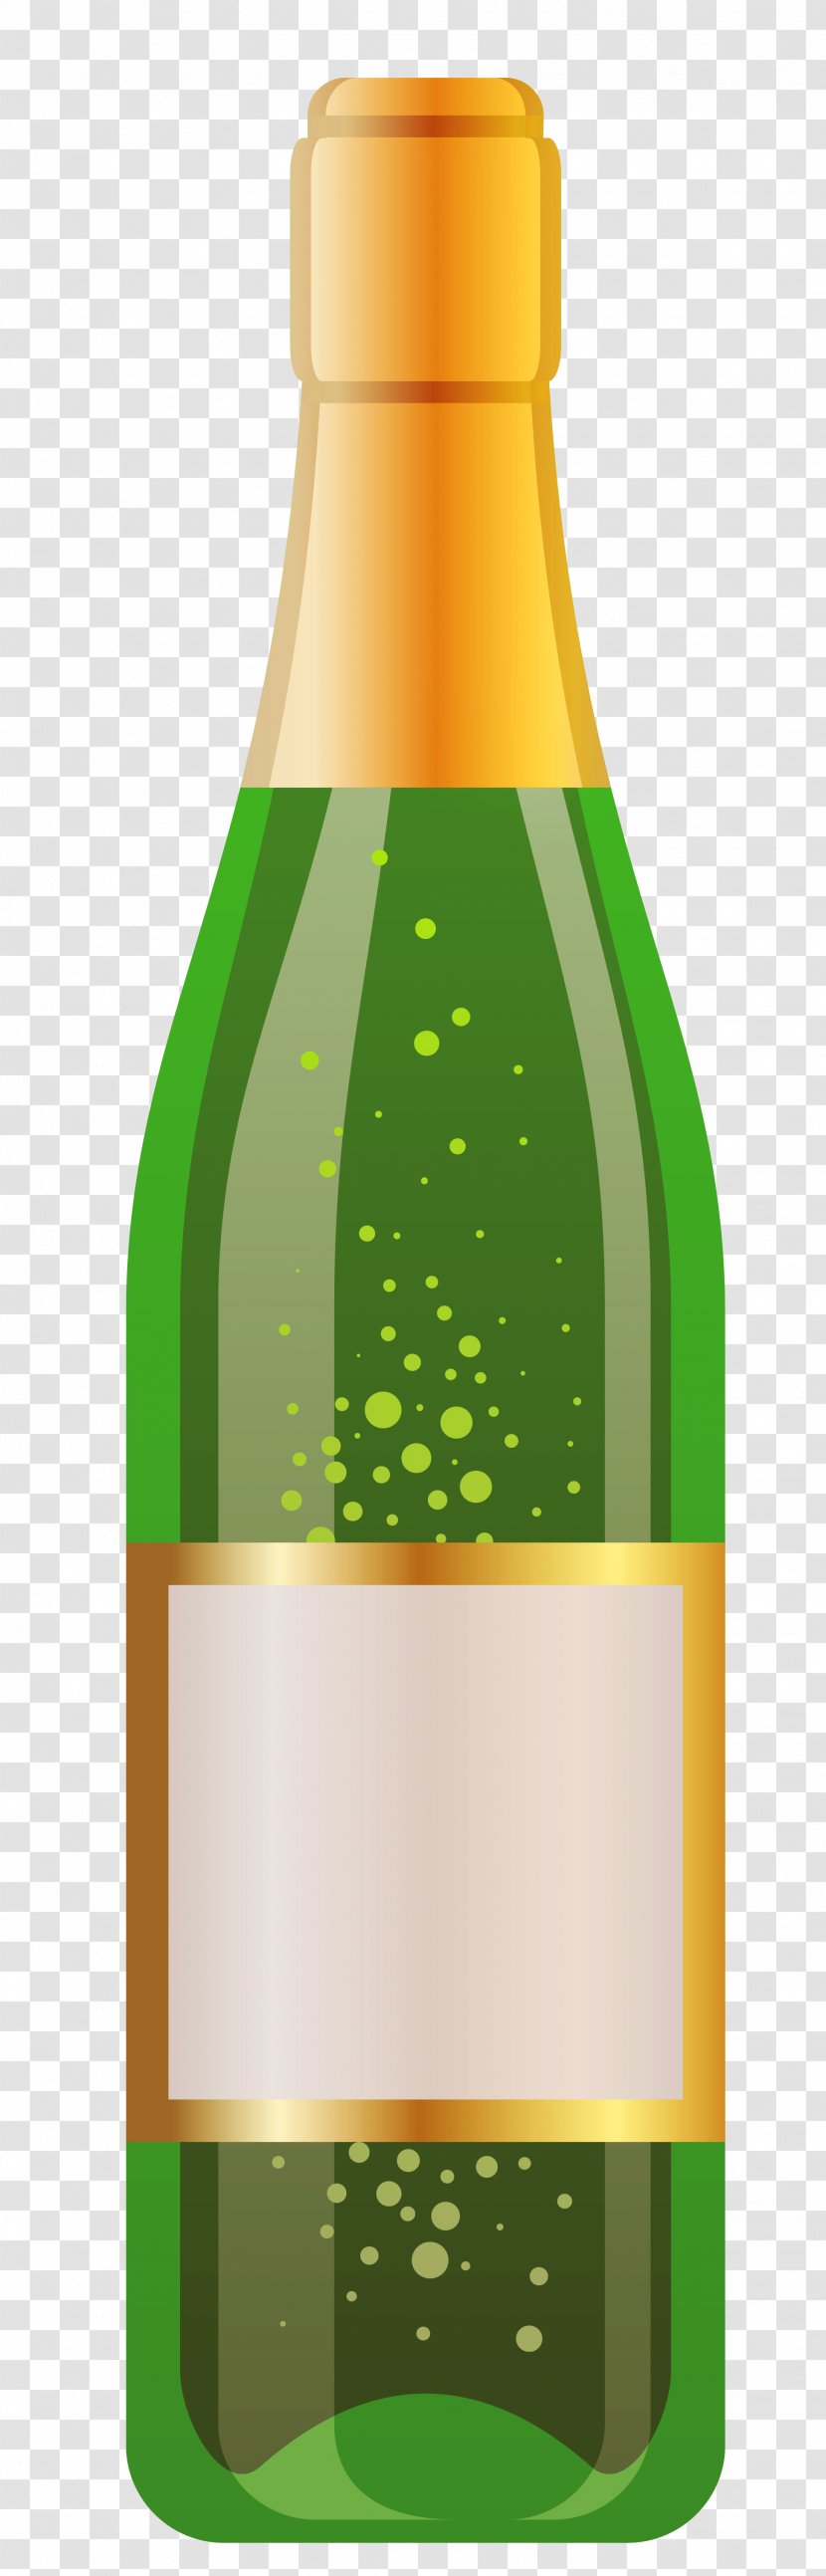 White Wine Red Champagne - Grape - Bottle Of Vector Clipart Transparent PNG